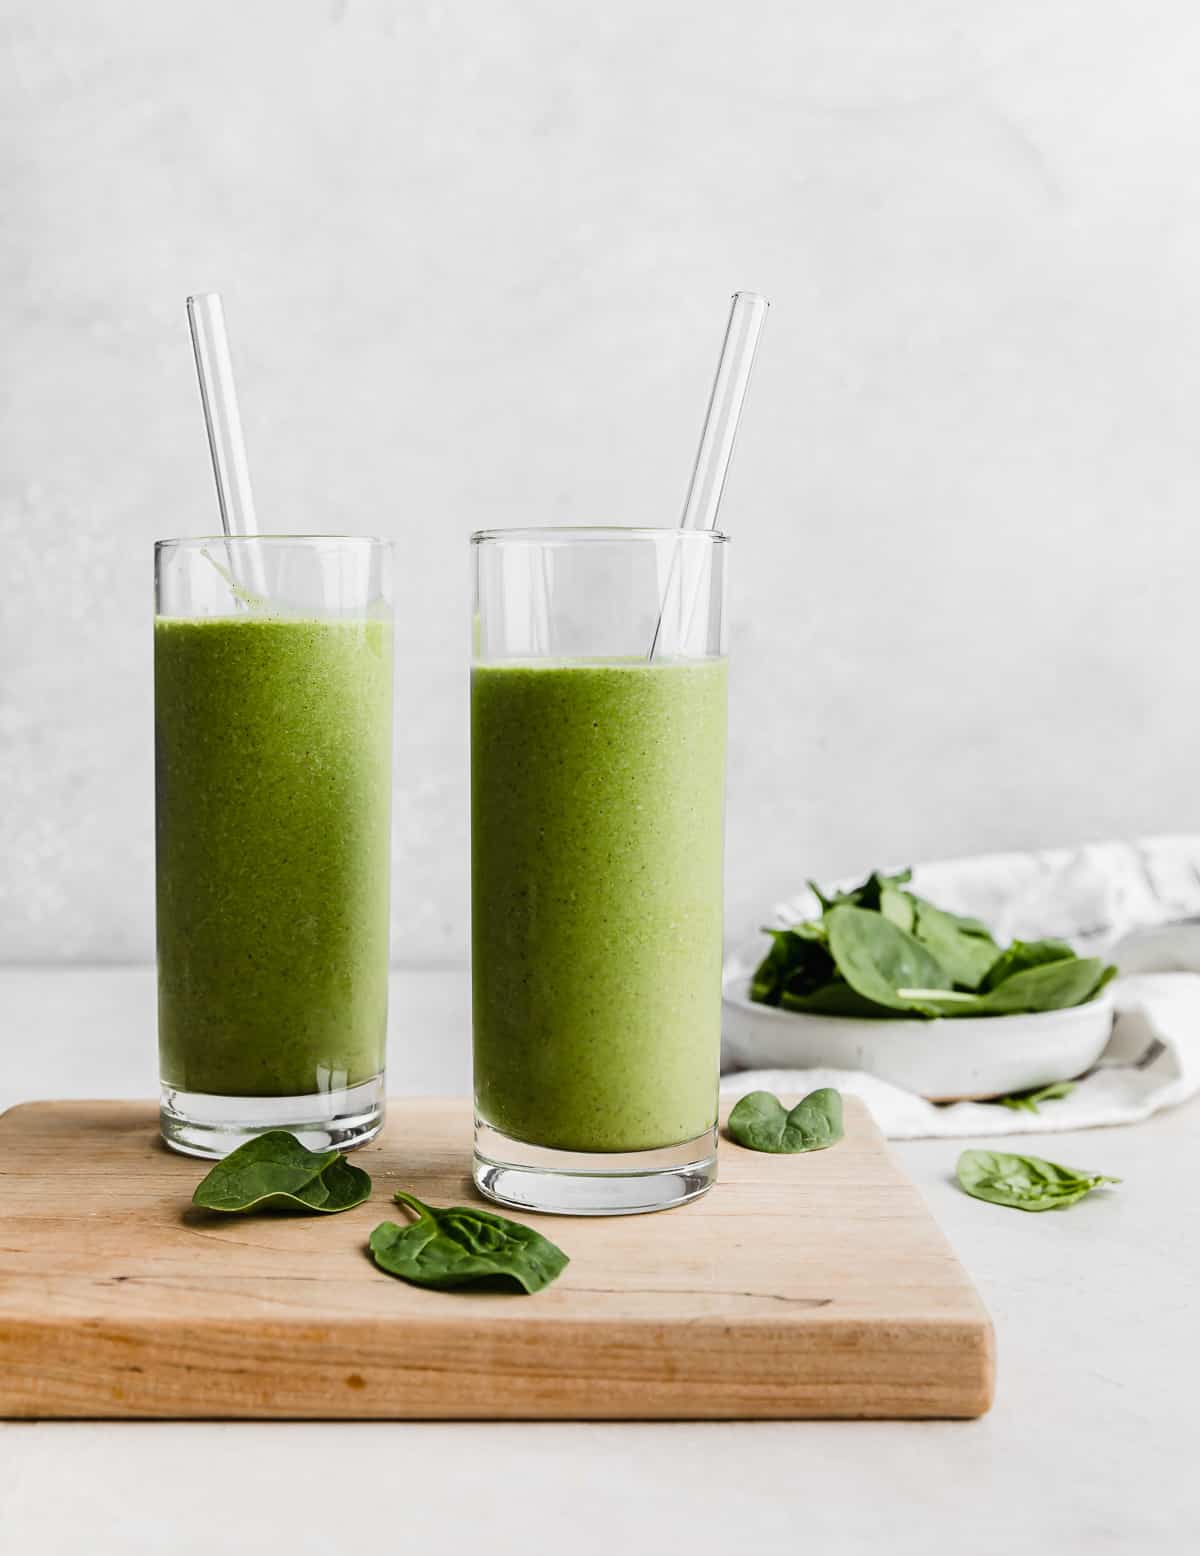 Two tall glasses full of Green Protein Smoothie against a white background.